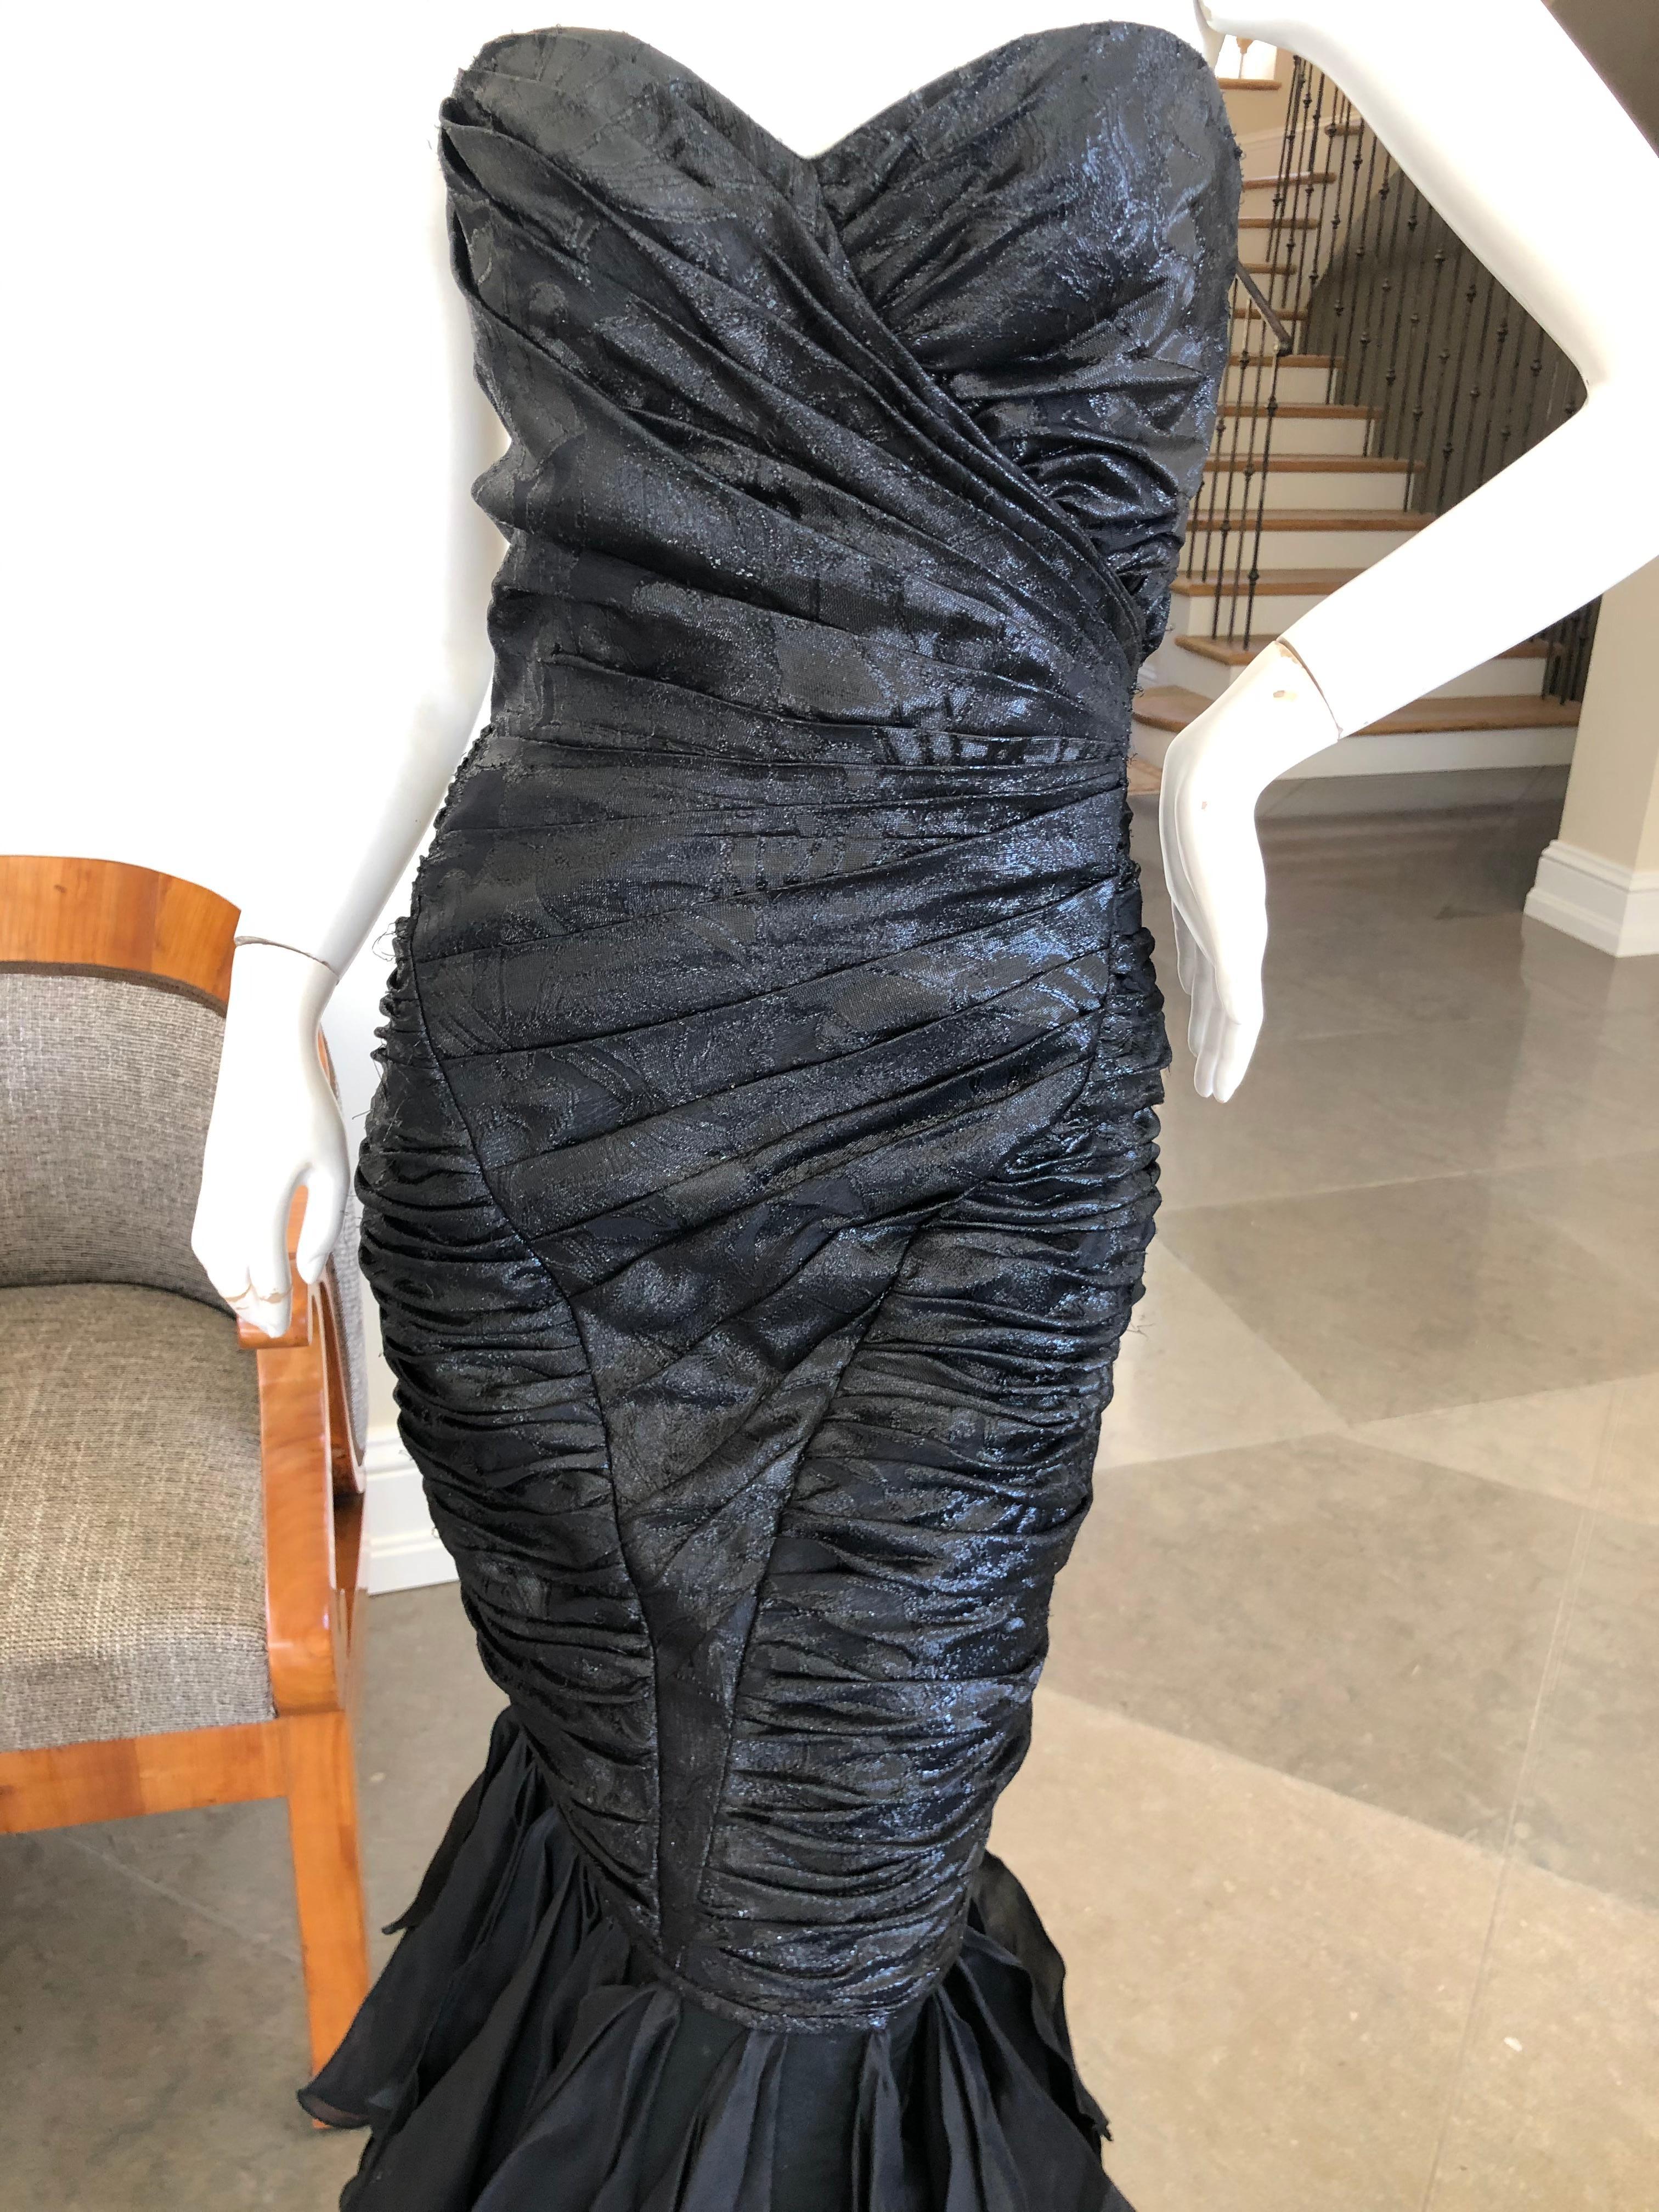 Emanuel Ungaro Parallel Vintage Strapless Black Hourglass Figure Mermaid Dress
So pretty . It is quite shiney, please use the zoom feature to appreciate all the details
Size 6
Bust 35